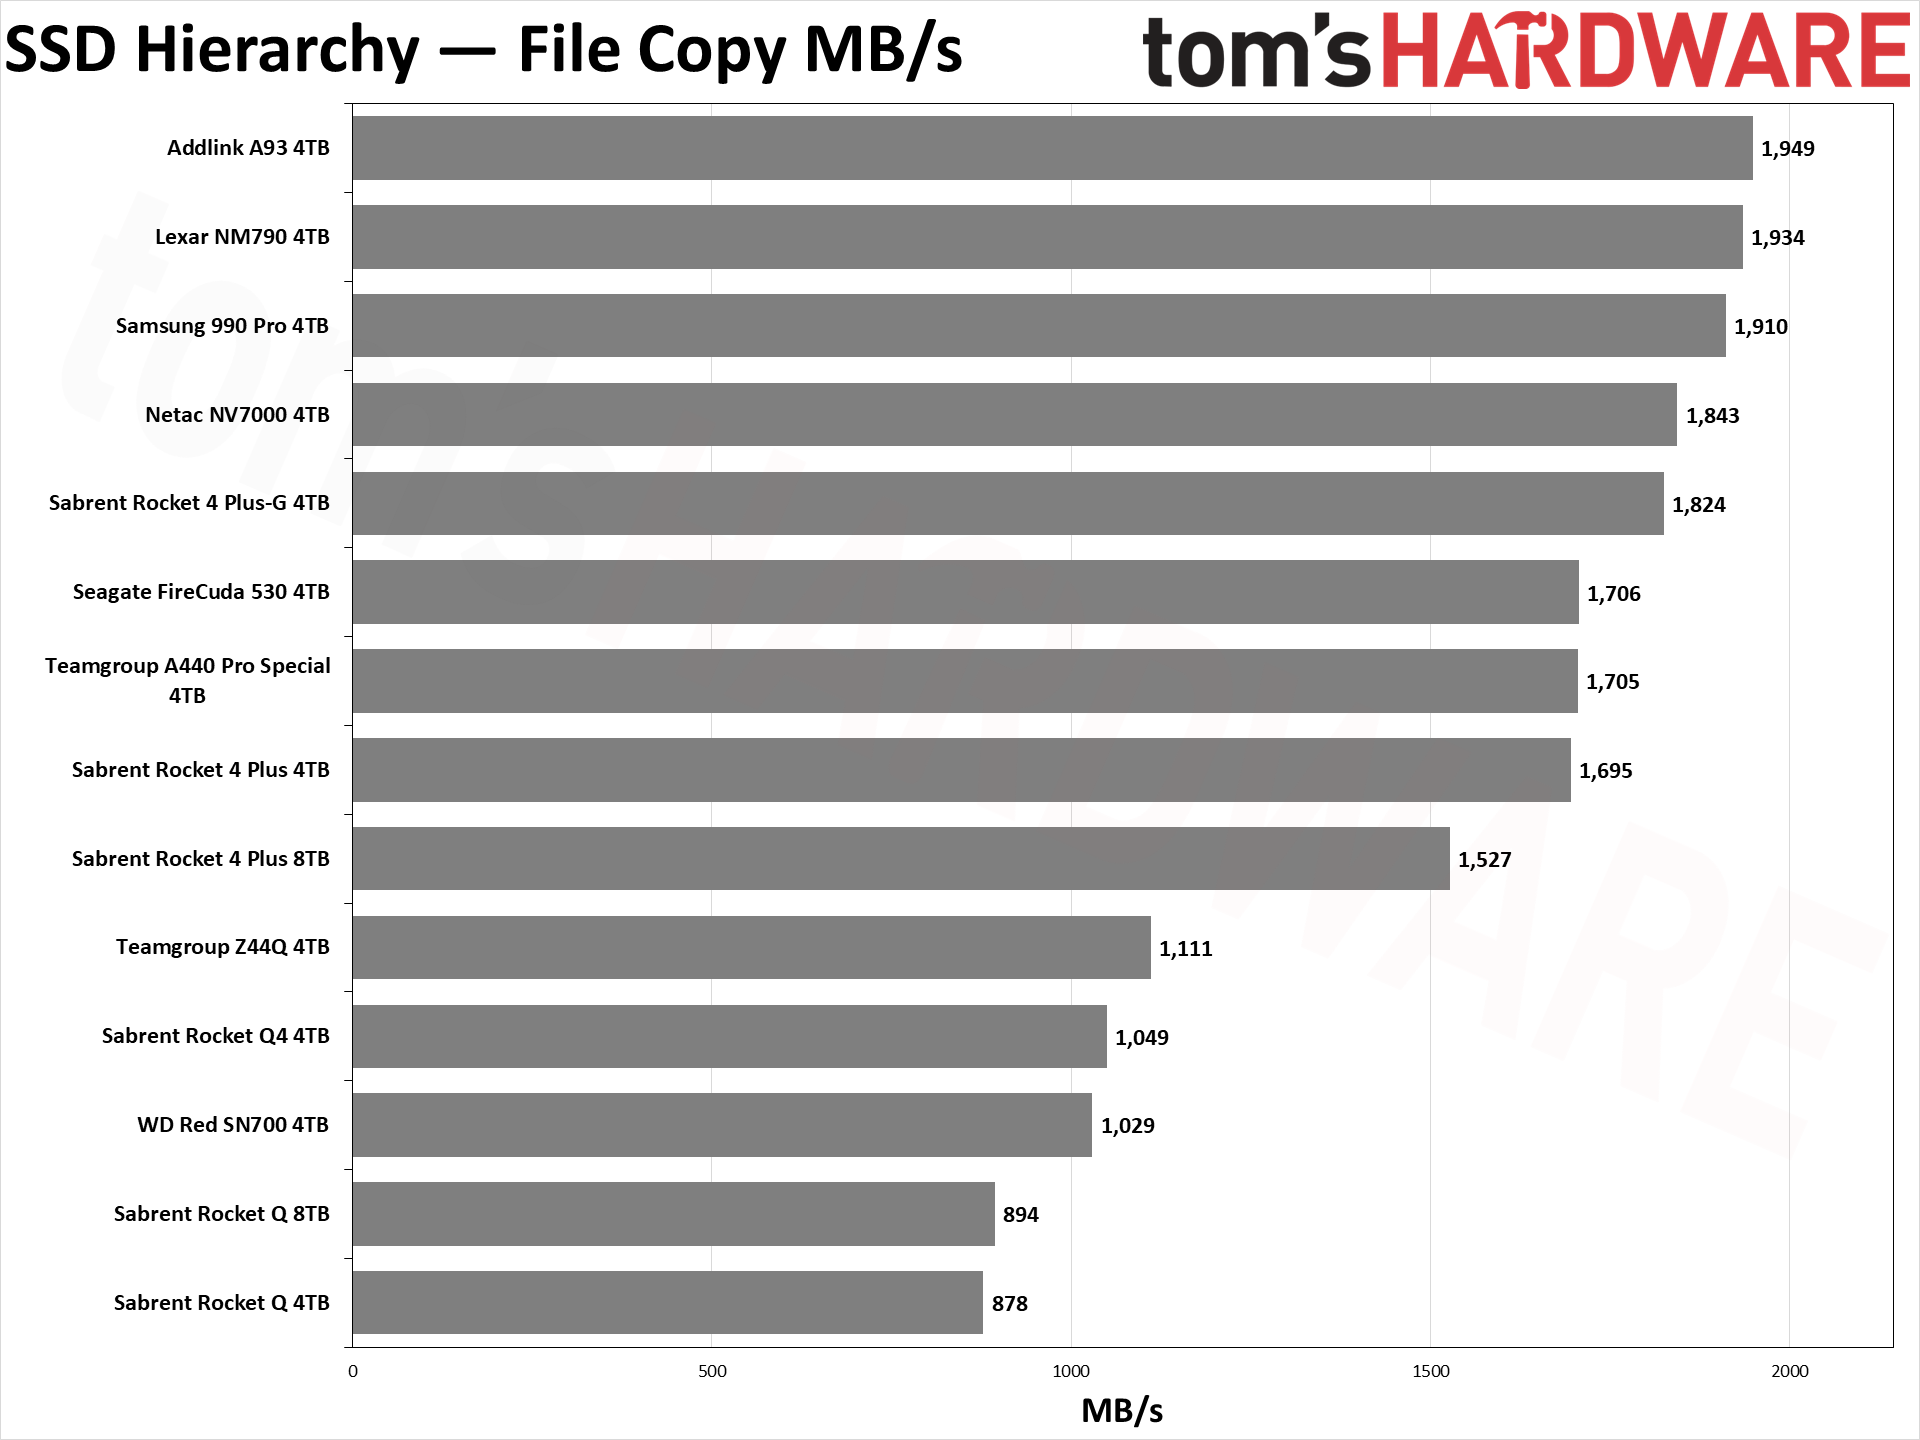 SSD Benchmarks Hierarchy performance charts